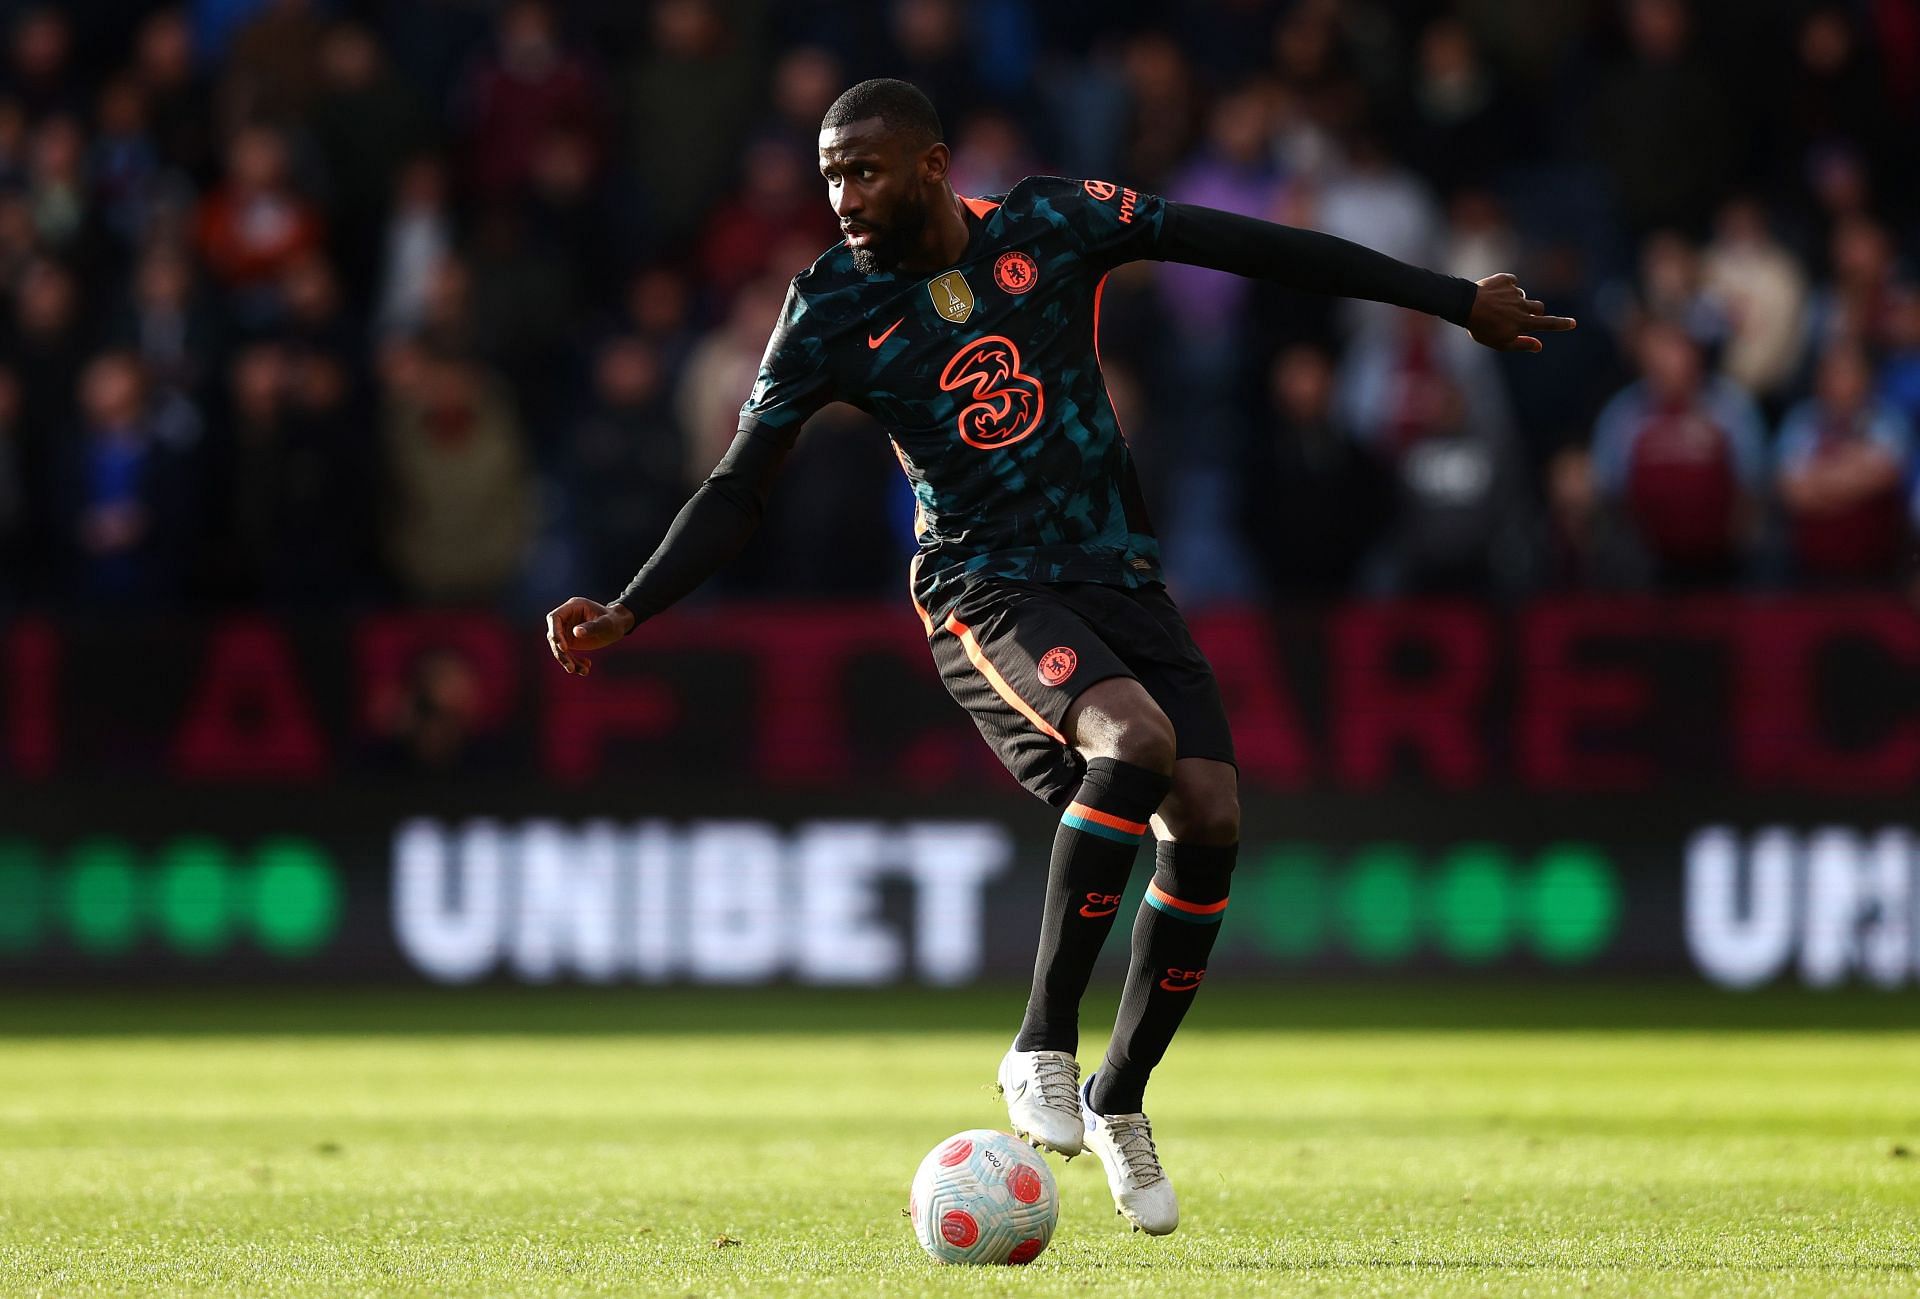 Rudiger could solve the defensive issues at Old Trafford